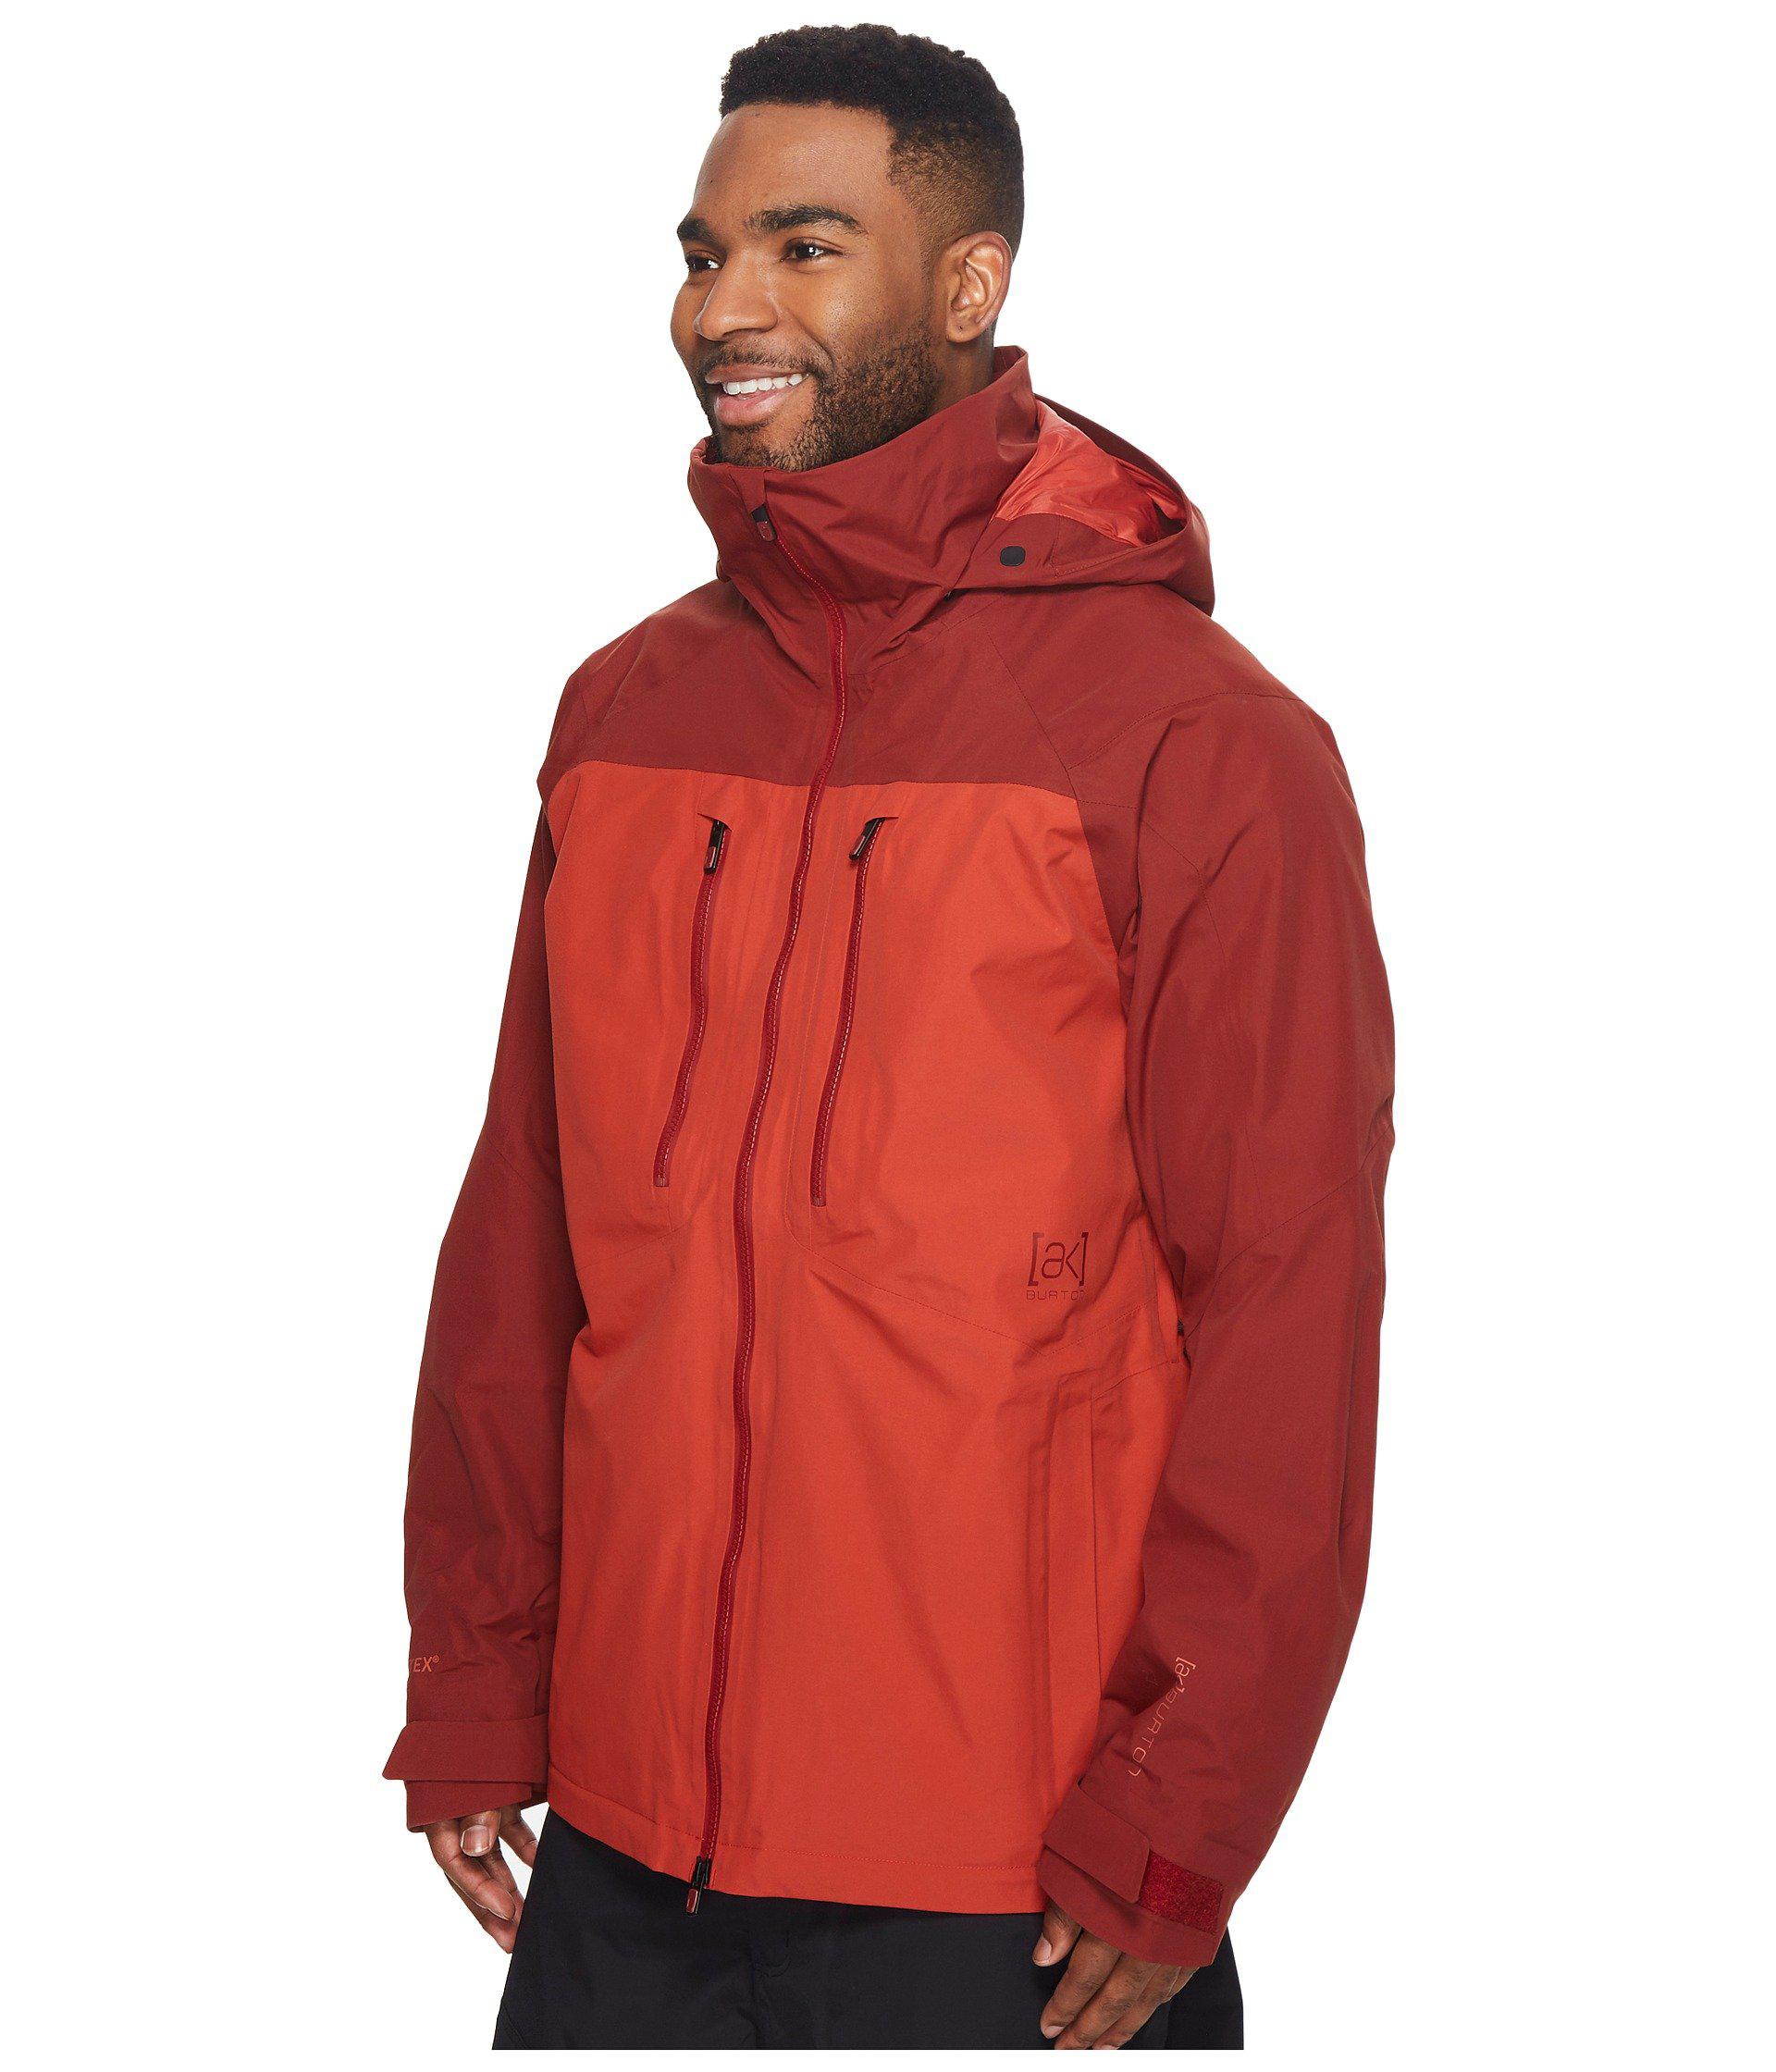 Burton Synthetic [ak] 2l Swash Jacket in Red for Men - Lyst